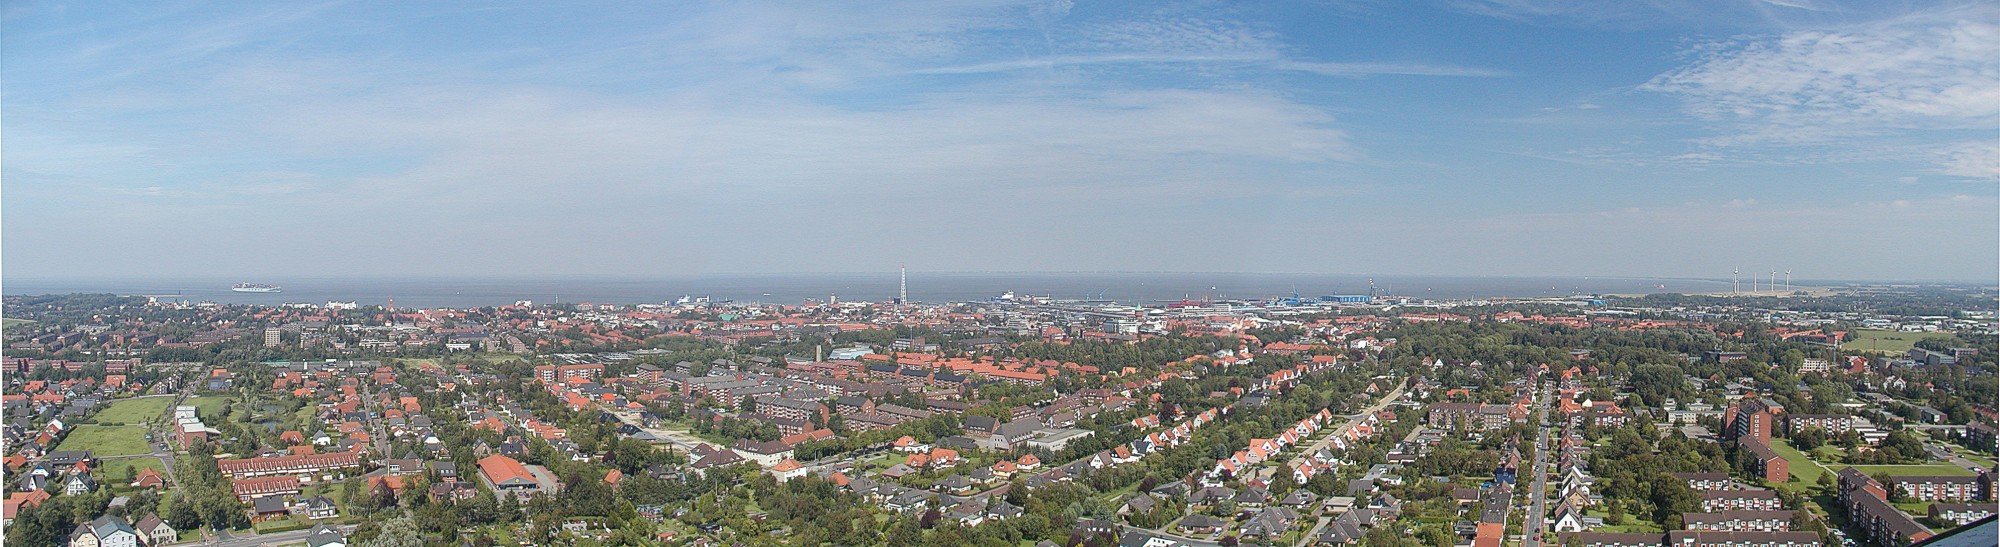 Cuxhaven panorama 02